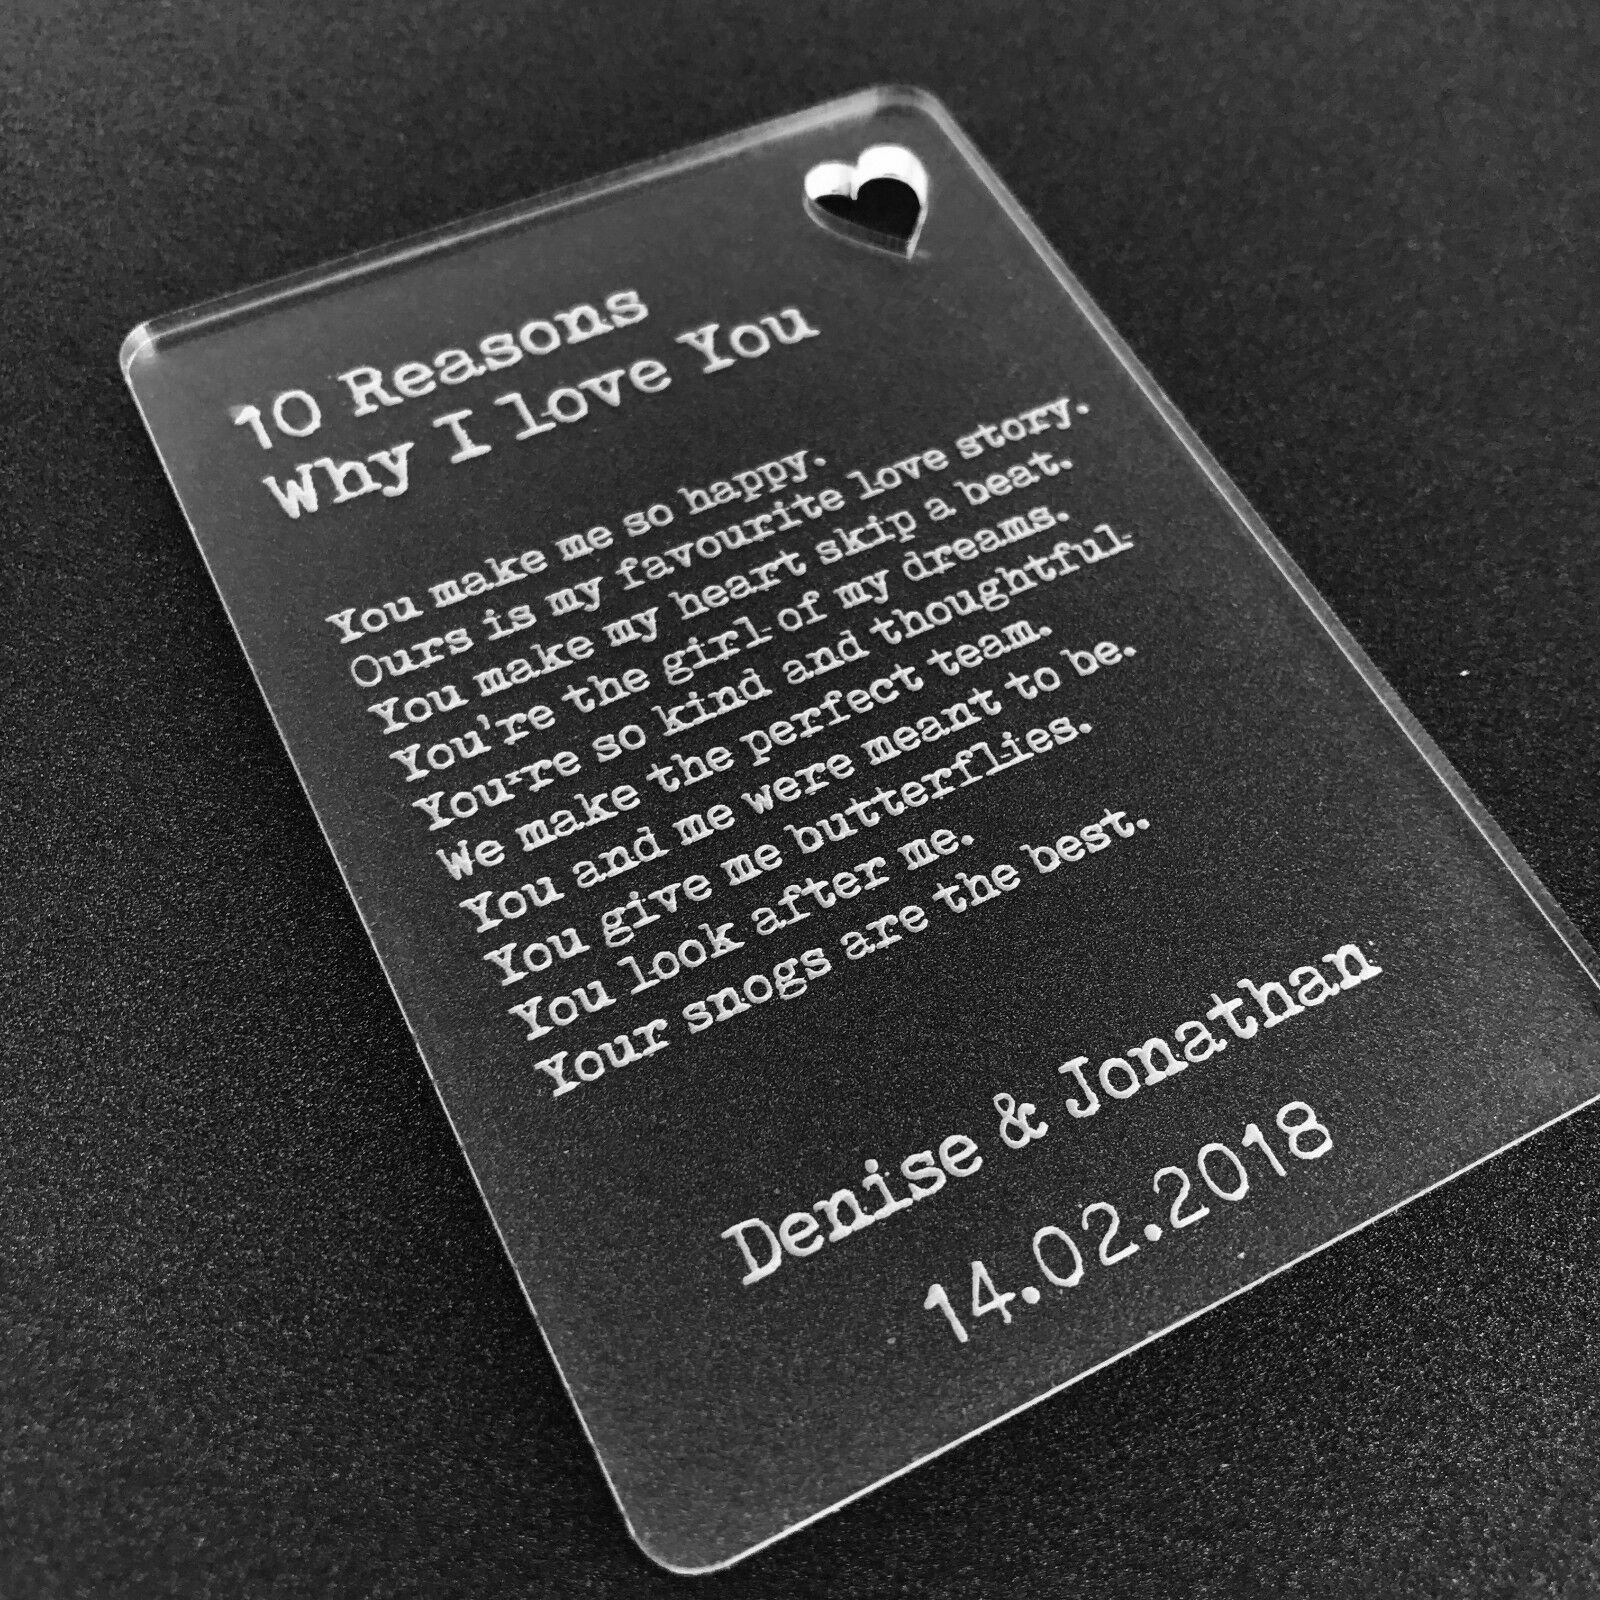 10-reasons-why-i-love-you-wallet-card-personalised-valentines-gift-for